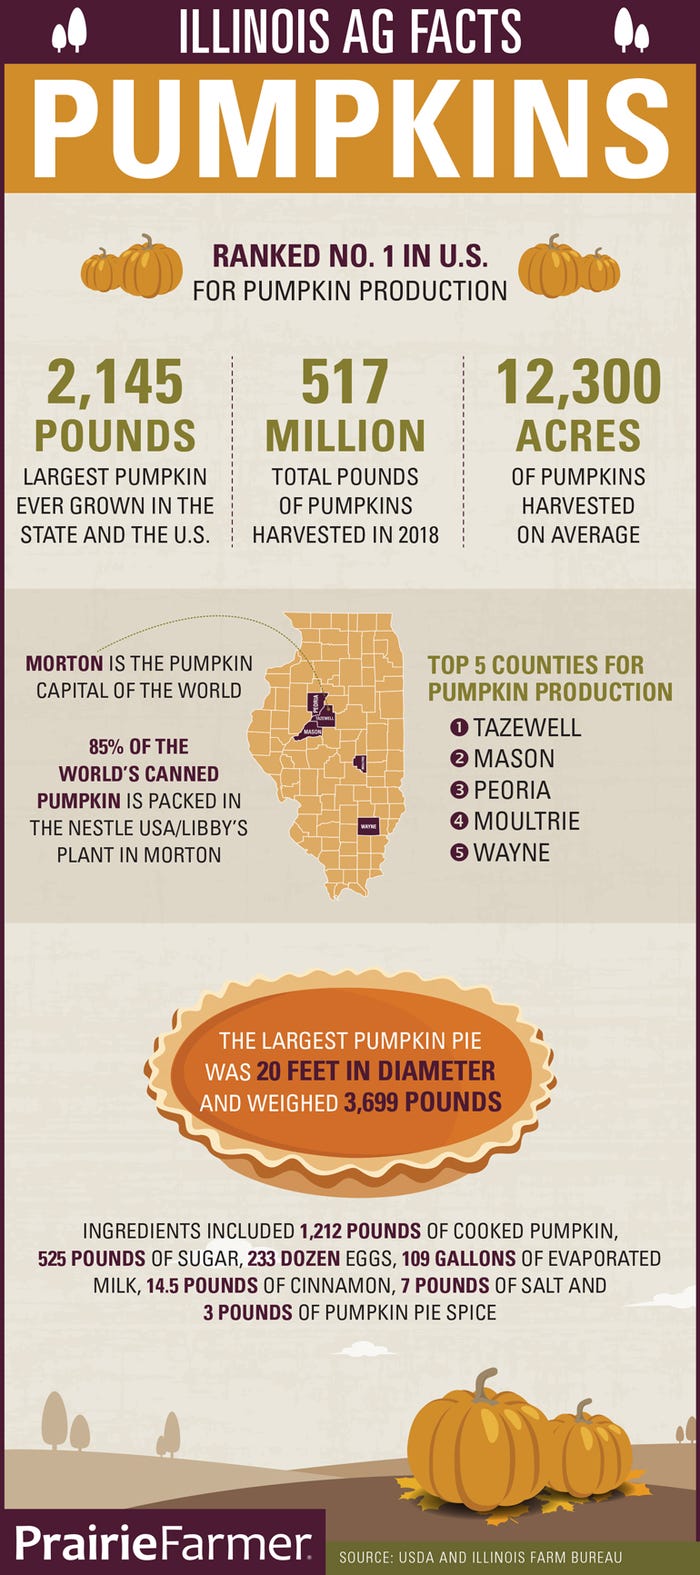 Illinois Ag Facts Pumpkins infographic